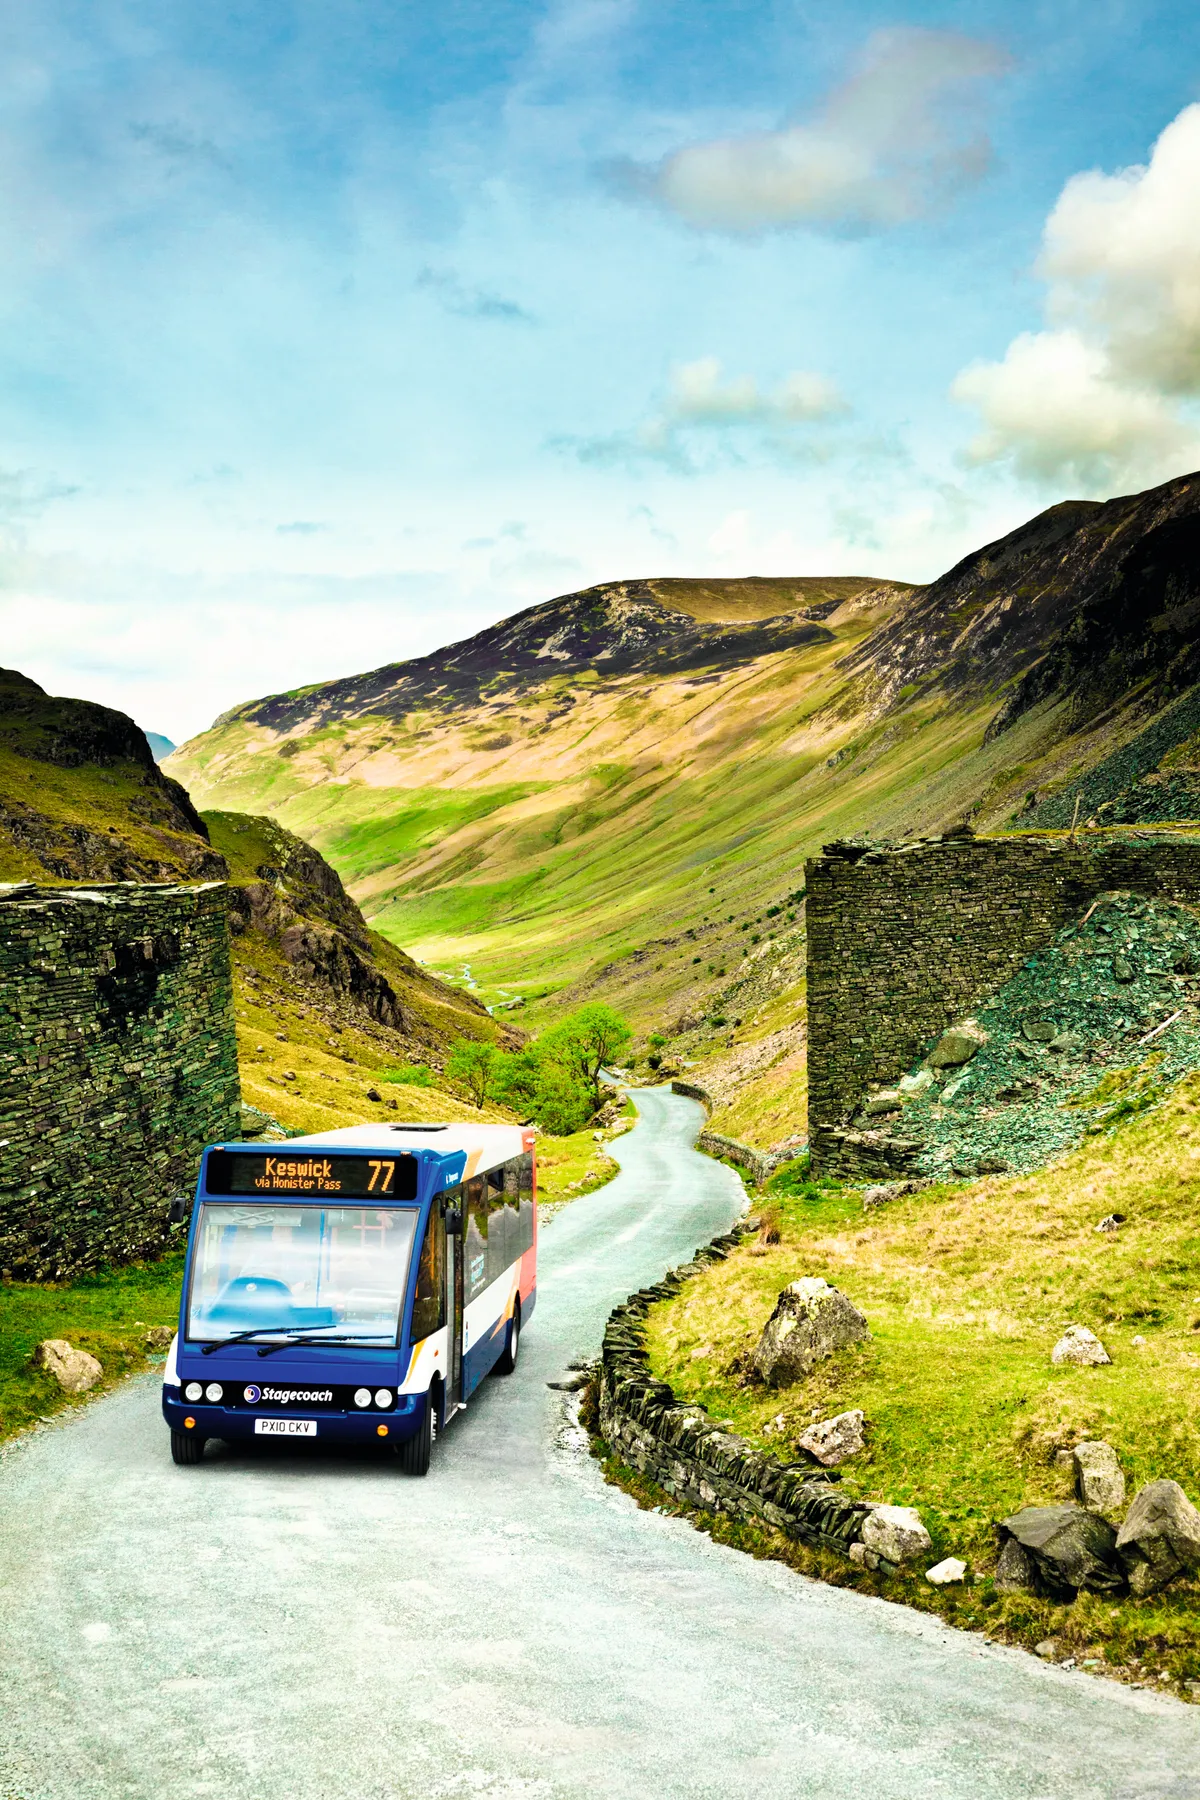 Rural community bus service to Keswick via Honister Pass, the Lake District, England, UK